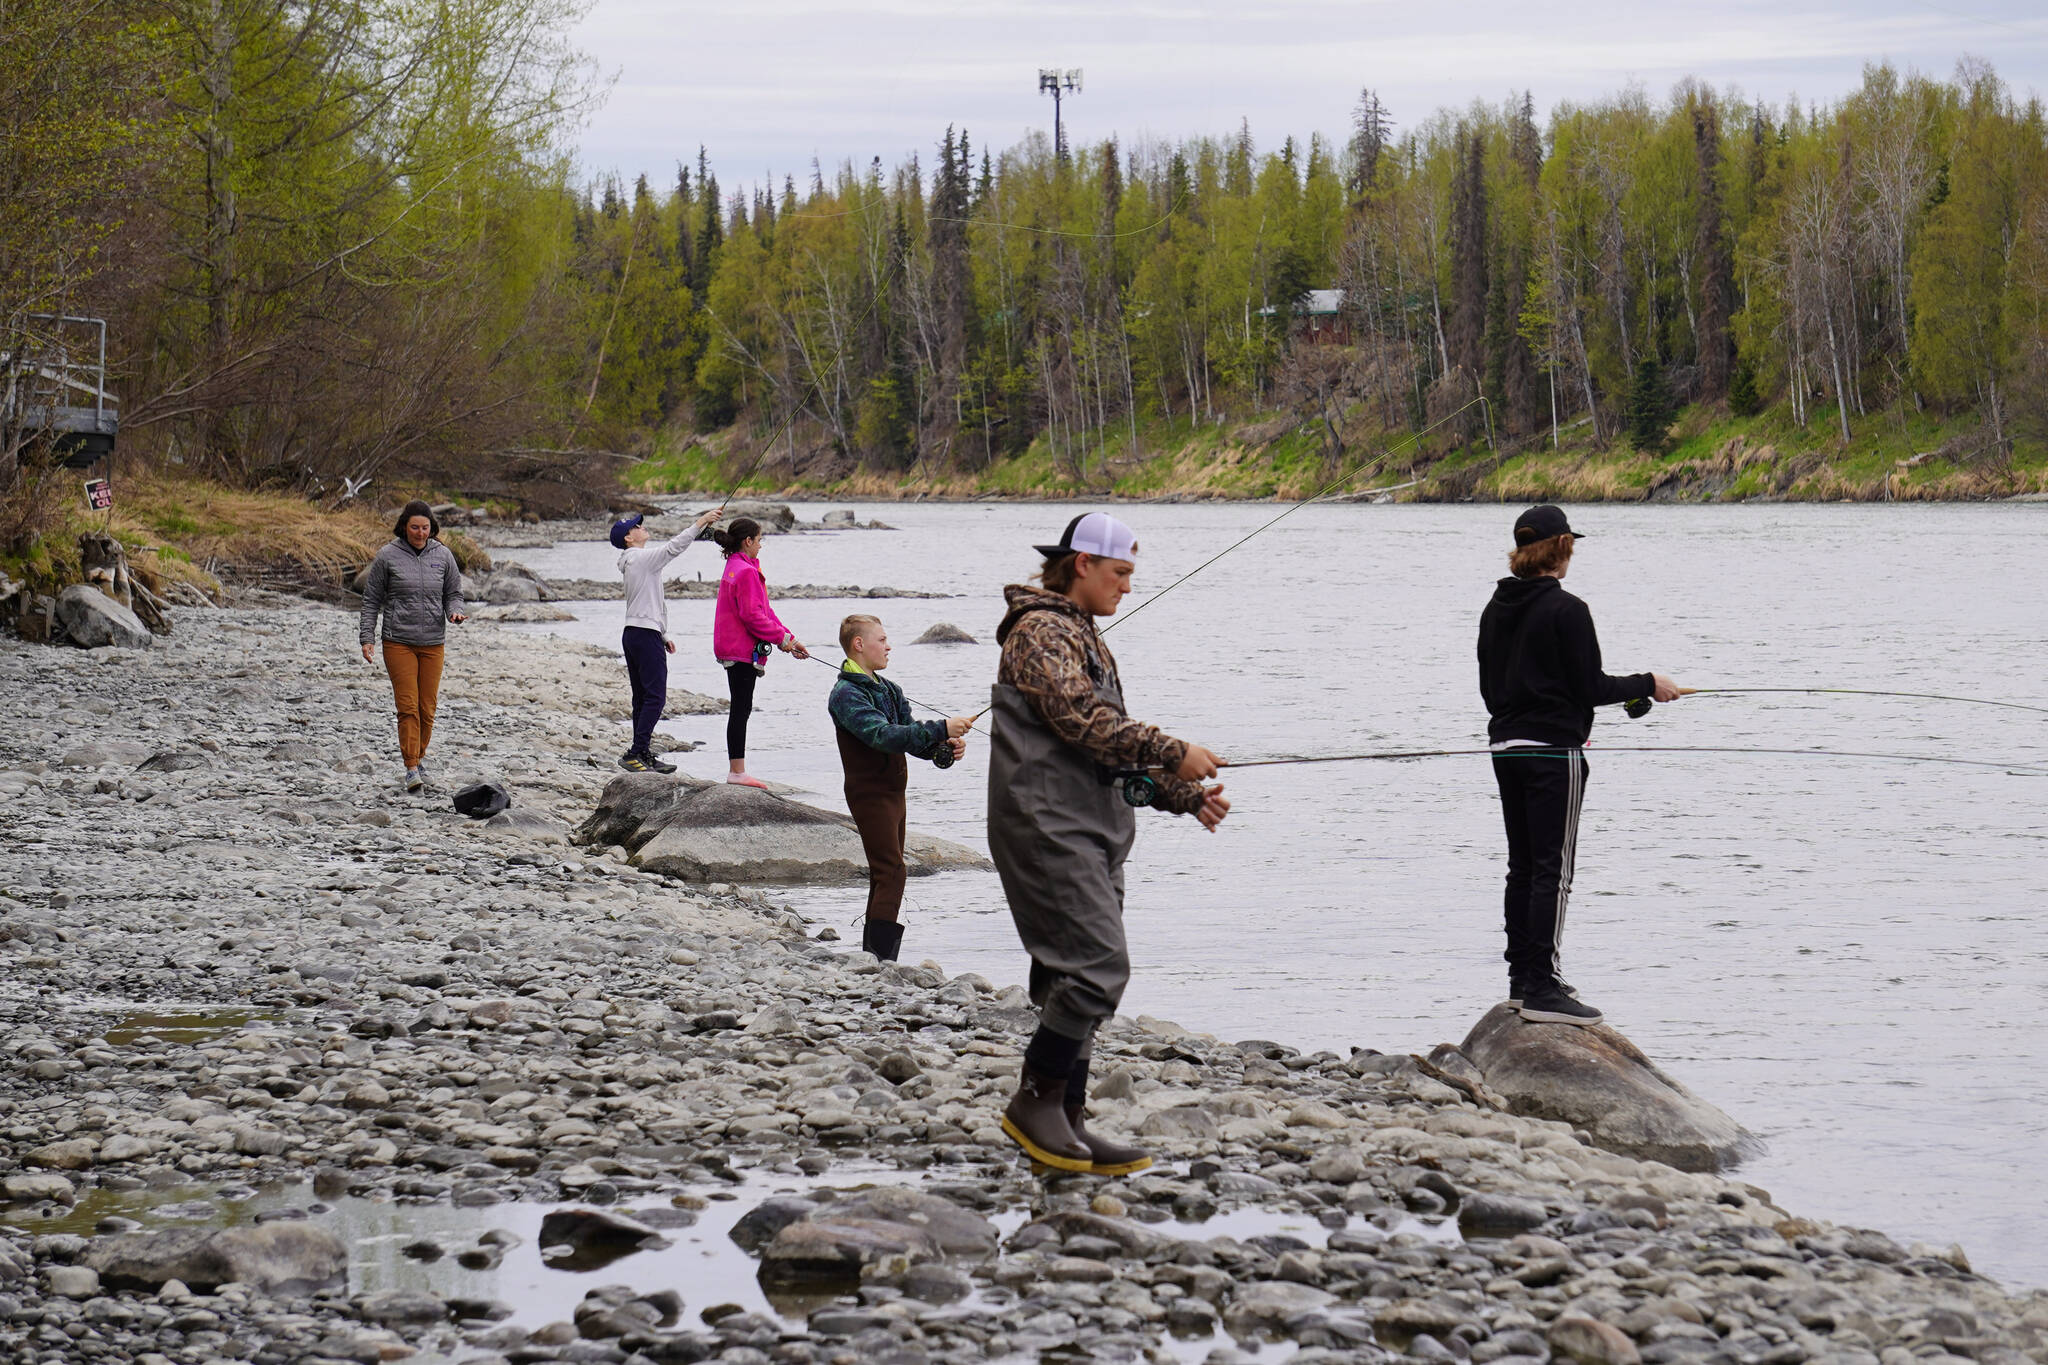 Middle schoolers practice fly casting into the Kenai River during a kids camp put on by Trout Unlimted on Wednesday, May 24, 2023, at the Donald E. Gilman Kenai River Center in Soldotna, Alaska. (Jake Dye/Peninsula Clarion)